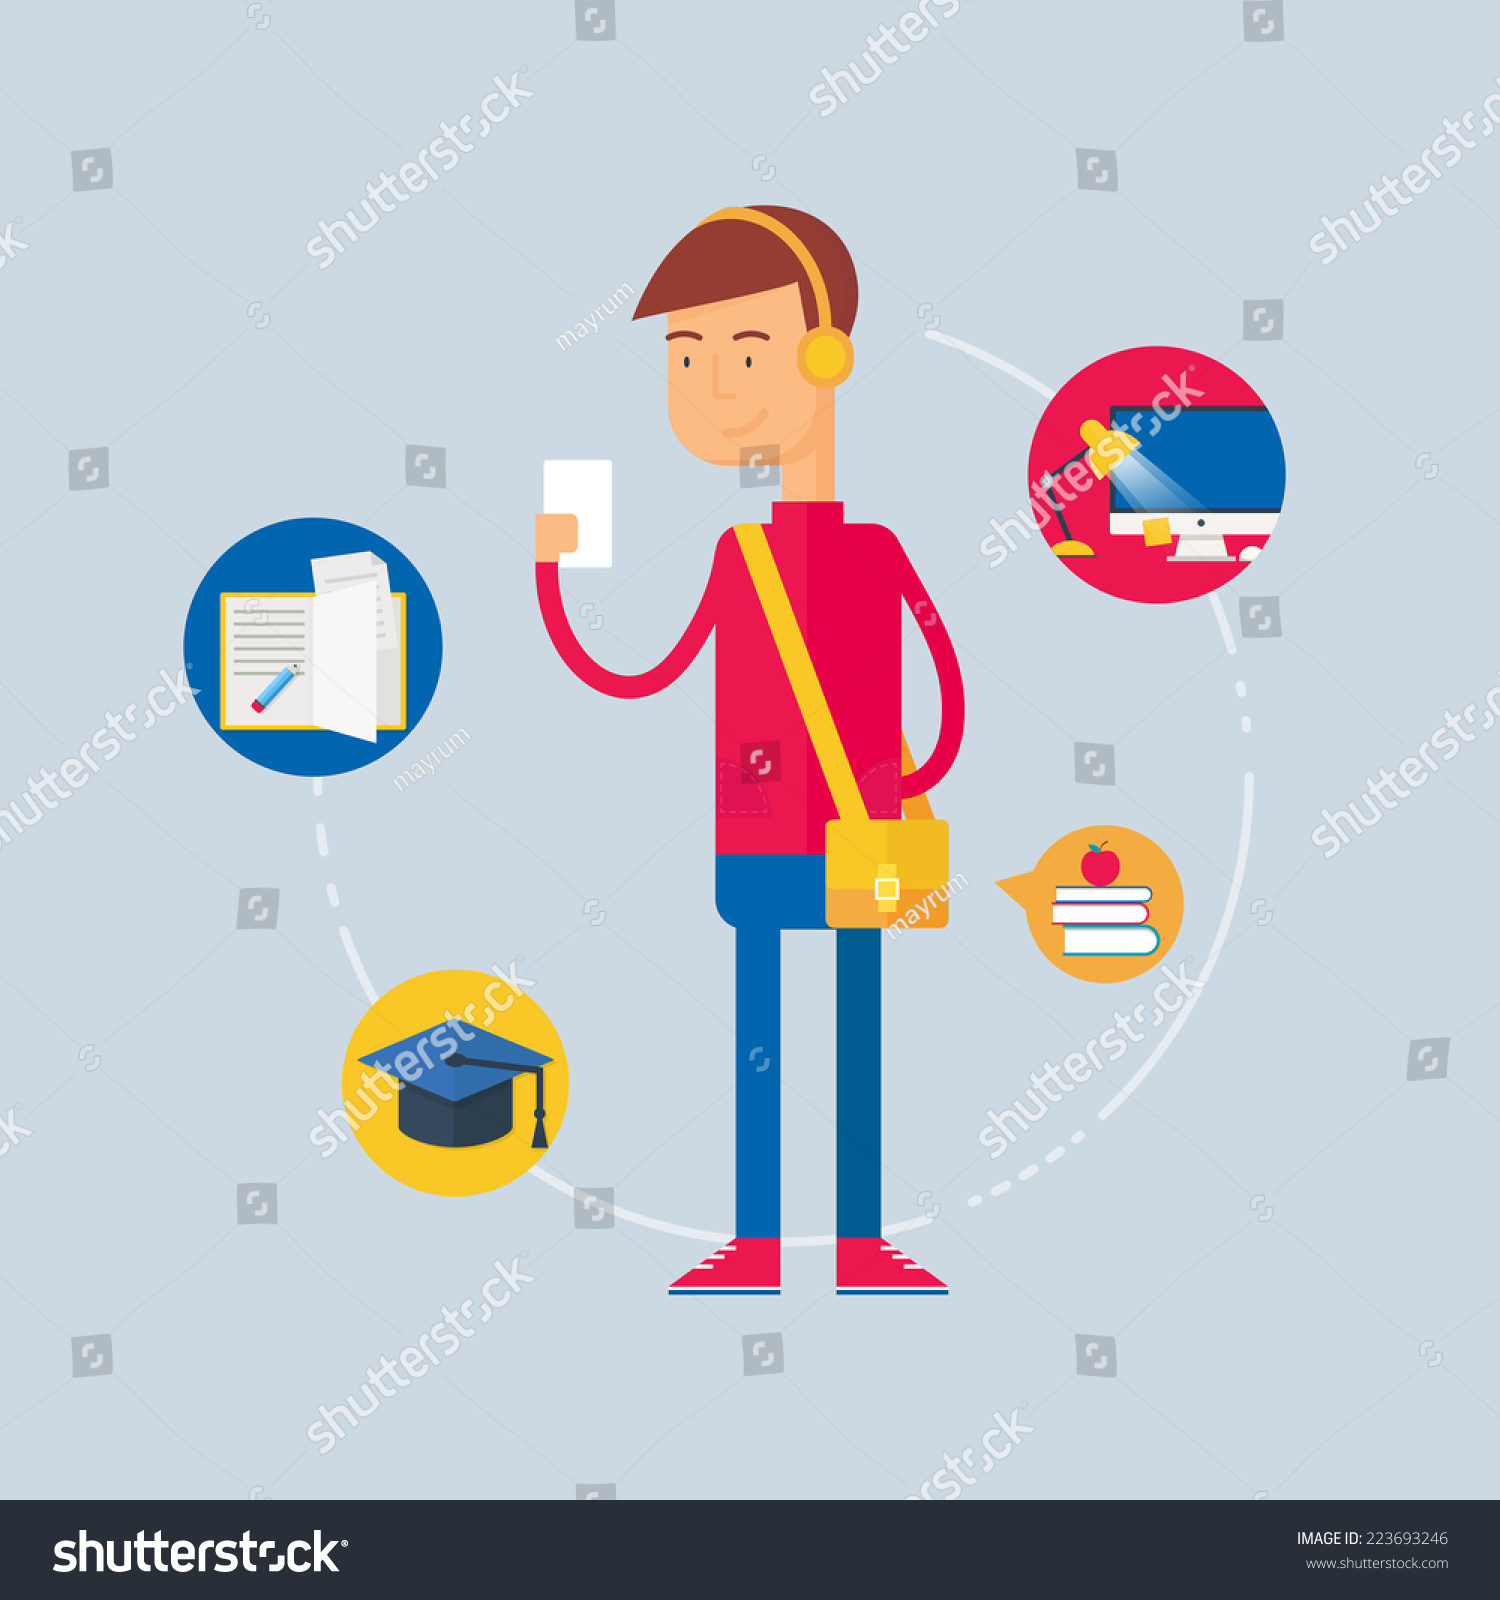 Character - Student, Education Concept. Vector Illustration, Flat Style